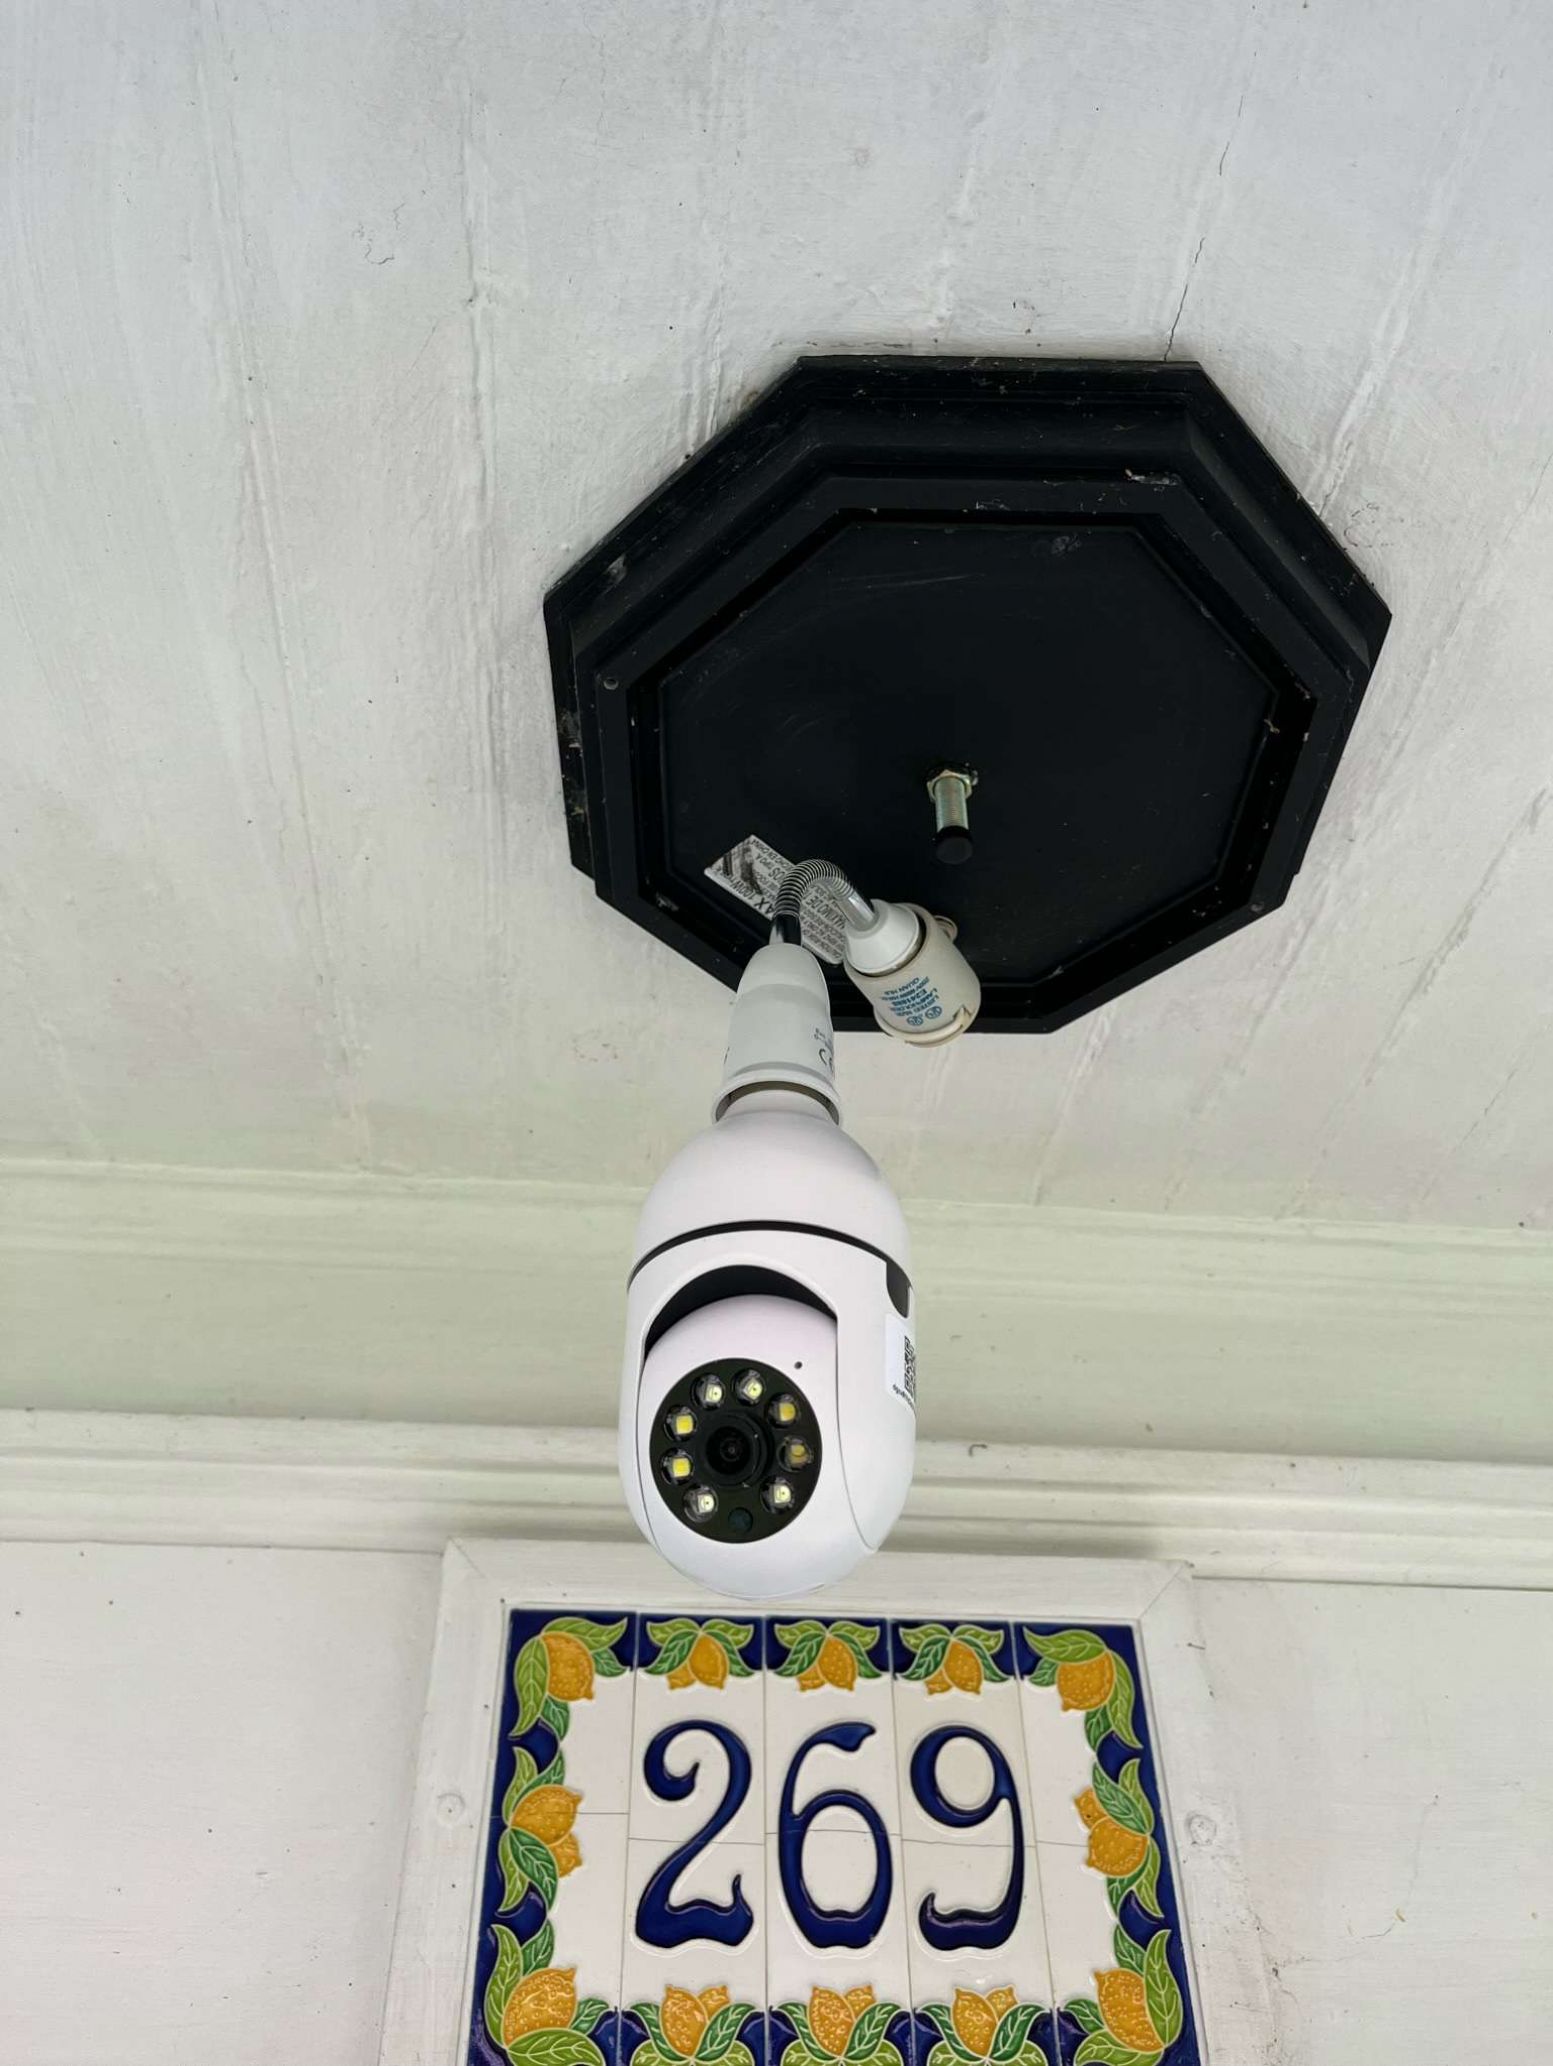 Nomad Security Camera Real Or Scam